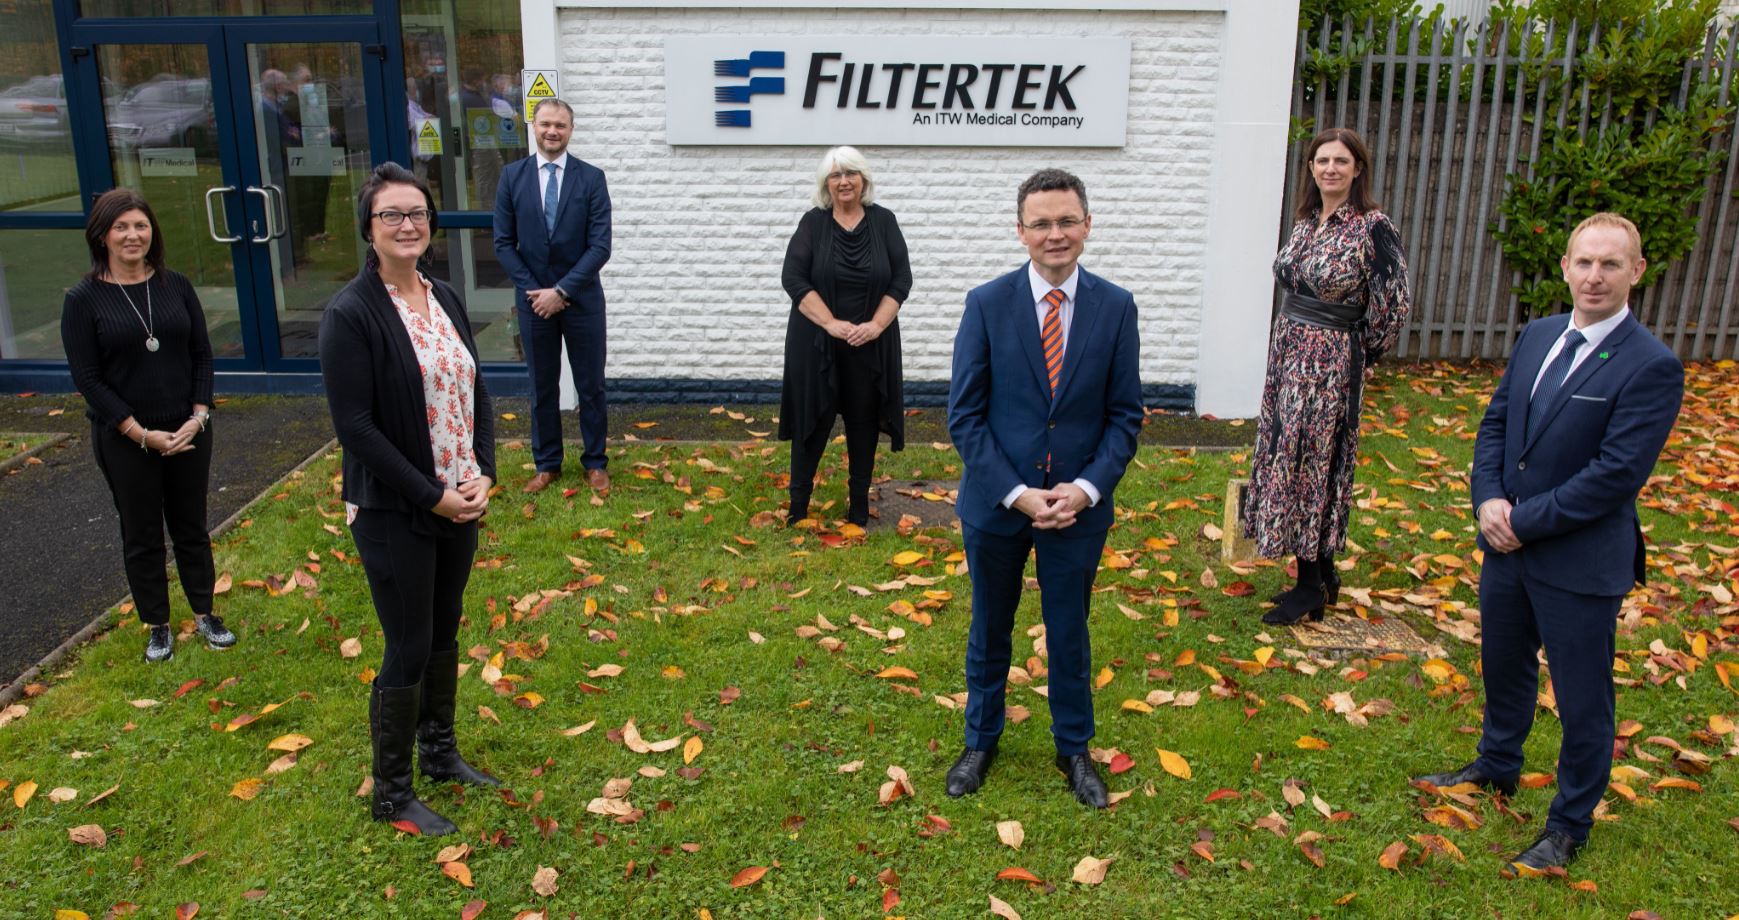 Filtertek - Pictured above is Gina Powers, ITW Medical, Minister for Office of Public Works Patrick O’Donovan TD, Michael Lohan, IDA Ireland, Margaret Doherty, ITW Filtertek, Will Corcoran, IDA Ireland, Elizabeth O’Connor, ITW Filtertek, and Maureen Timlin, IDA Ireland. Picture: True Media